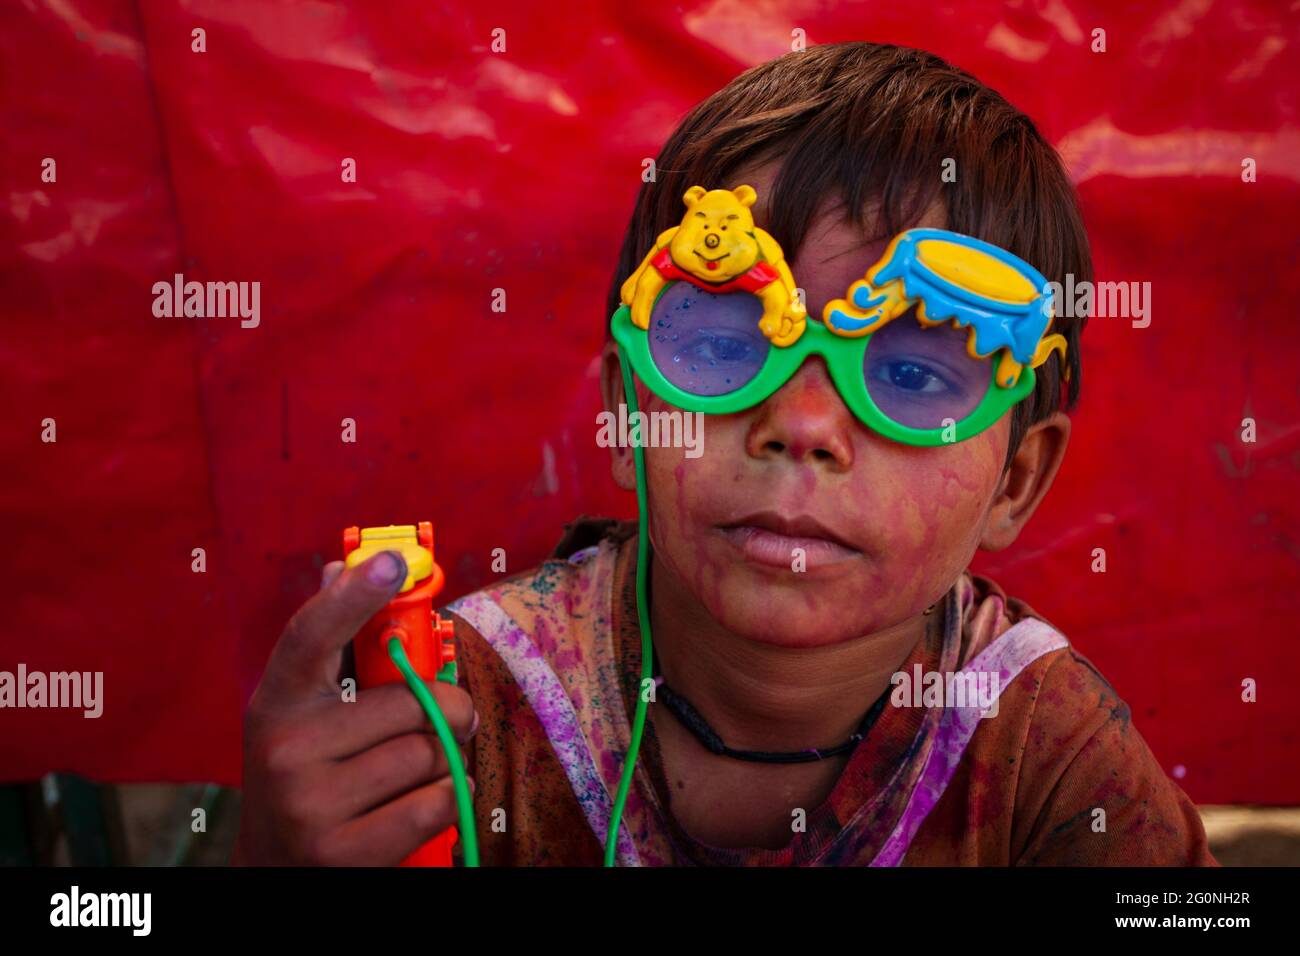 Portrait of Indian boy wearing colourful spectacles Stock Photo